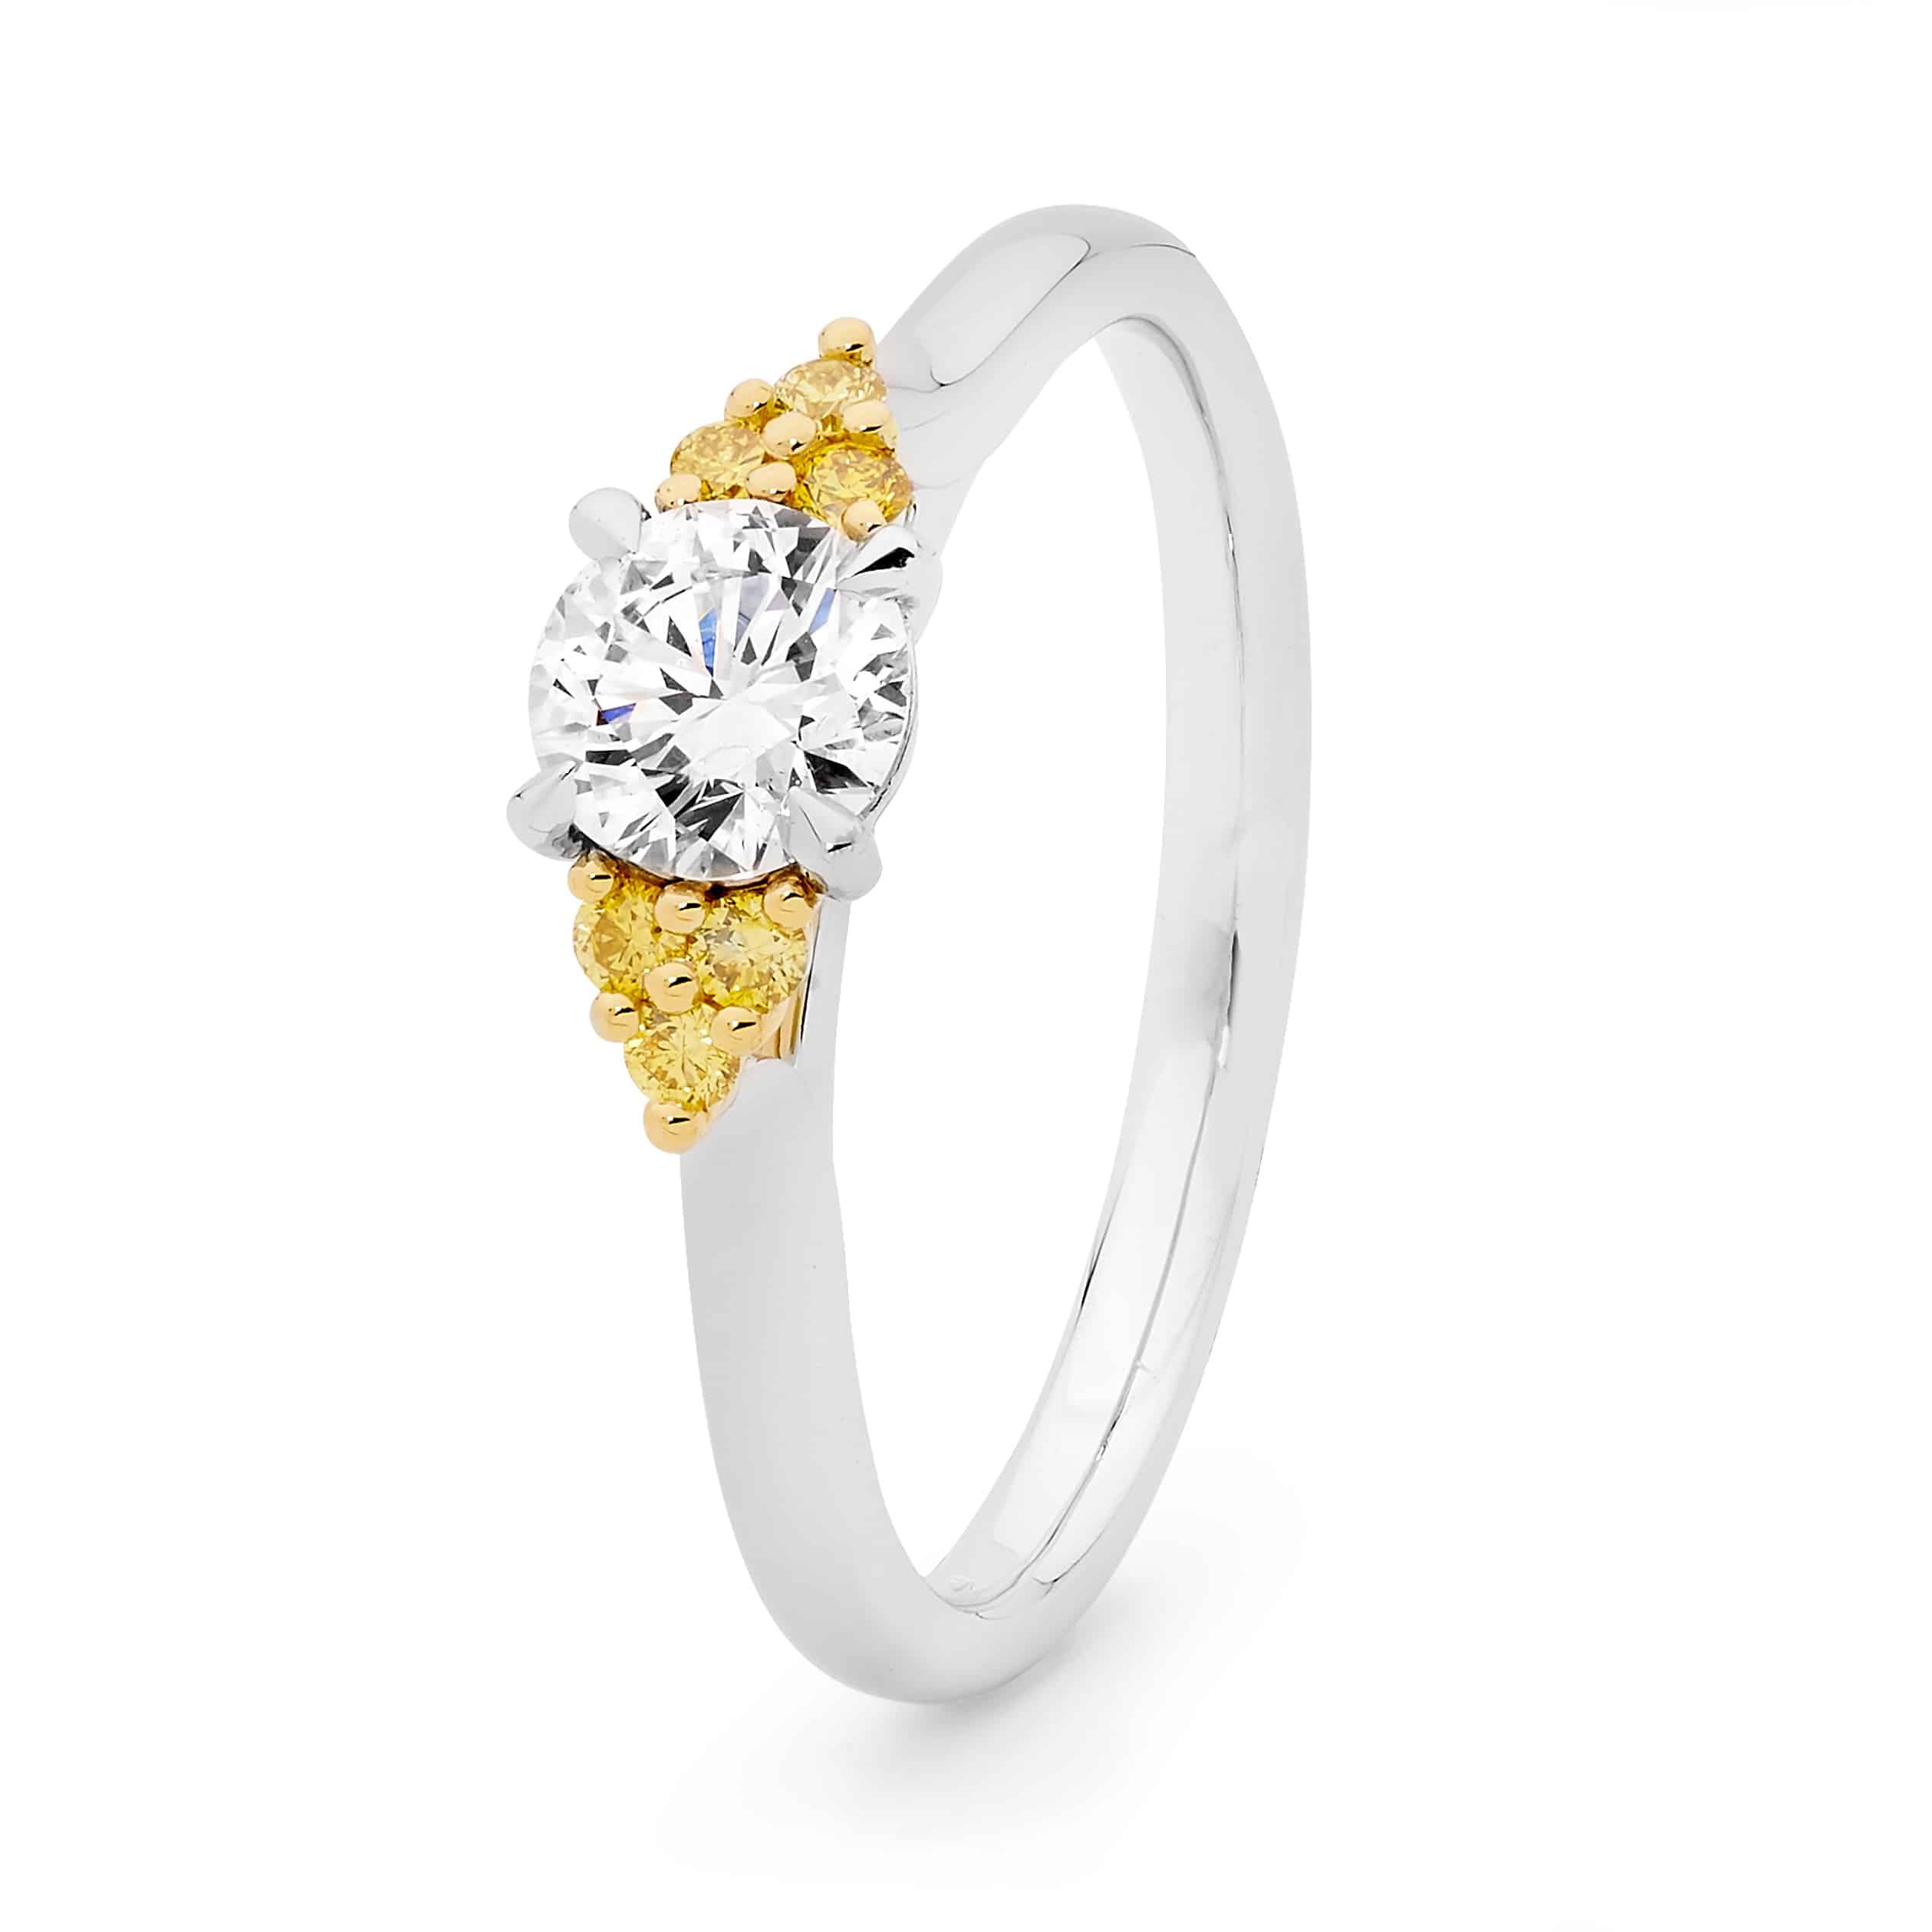 Best Gold Diamond Ring Jewelry Gift | Best Aesthetic Yellow Gold Diamond  Ring Jewelry Gift for Women, Mother, Wife | Mason & Madison Co.